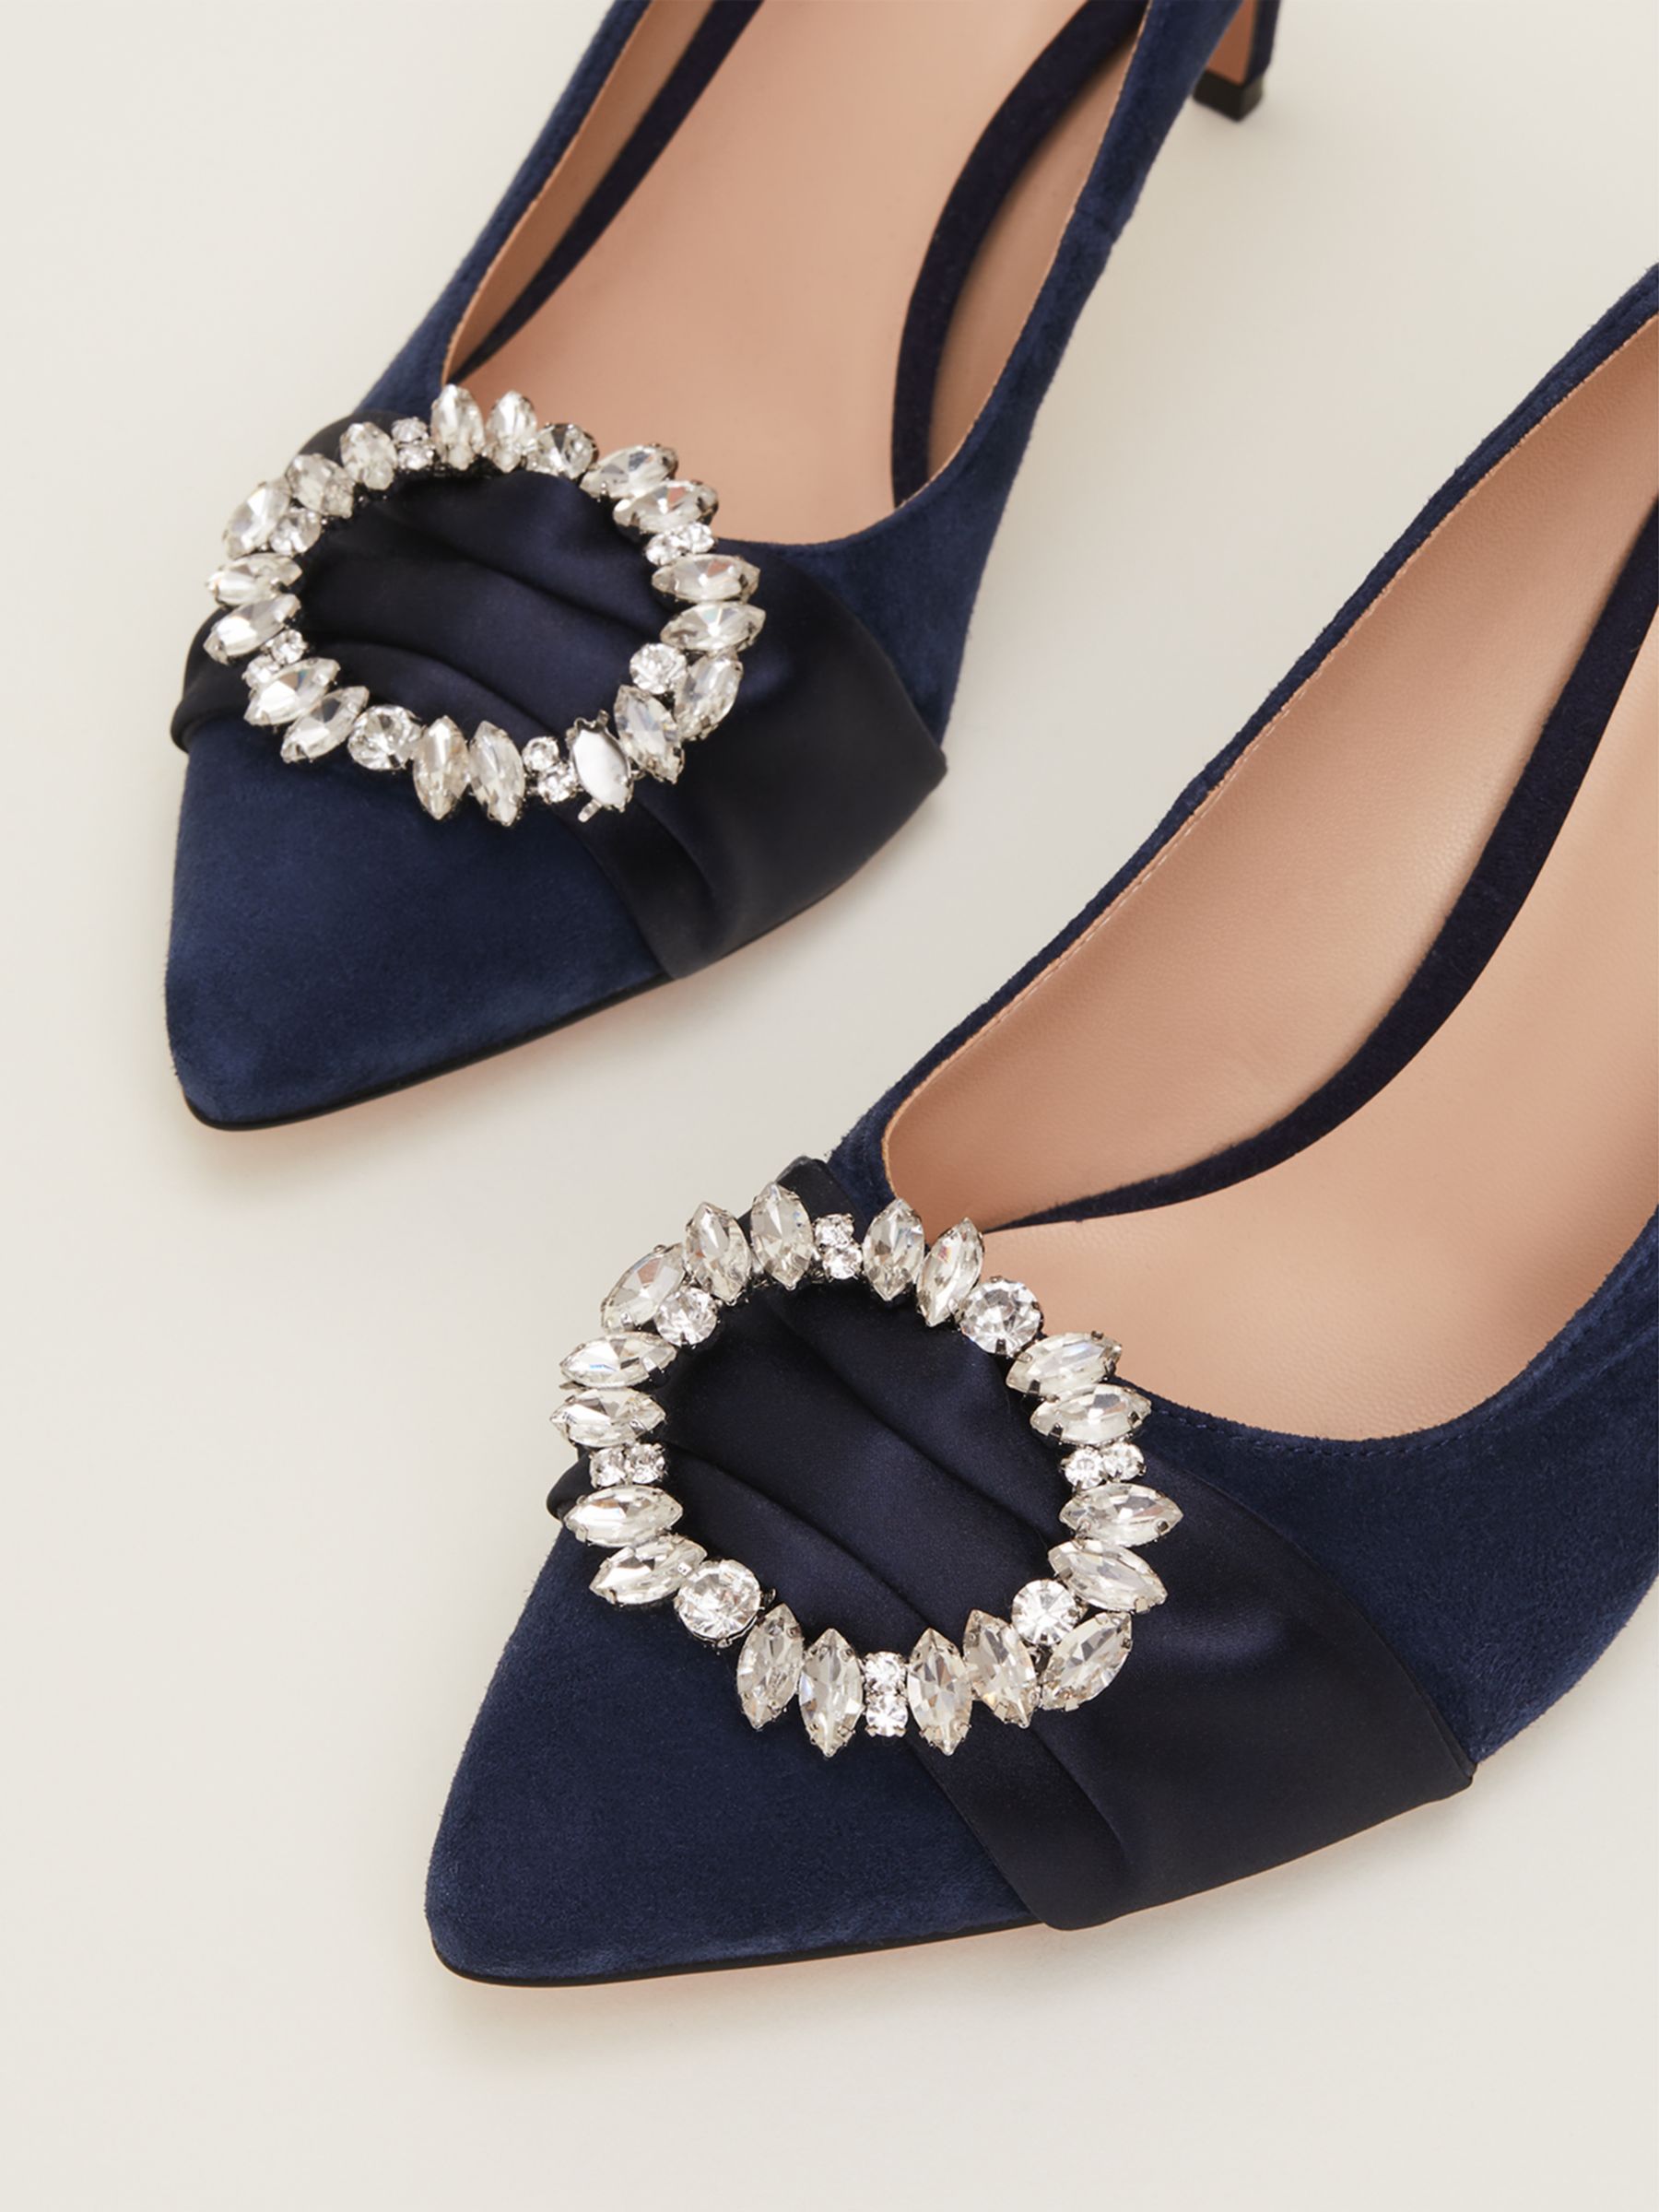 Buy Phase Eight Jewel Ribbon Suede Court Shoes Online at johnlewis.com